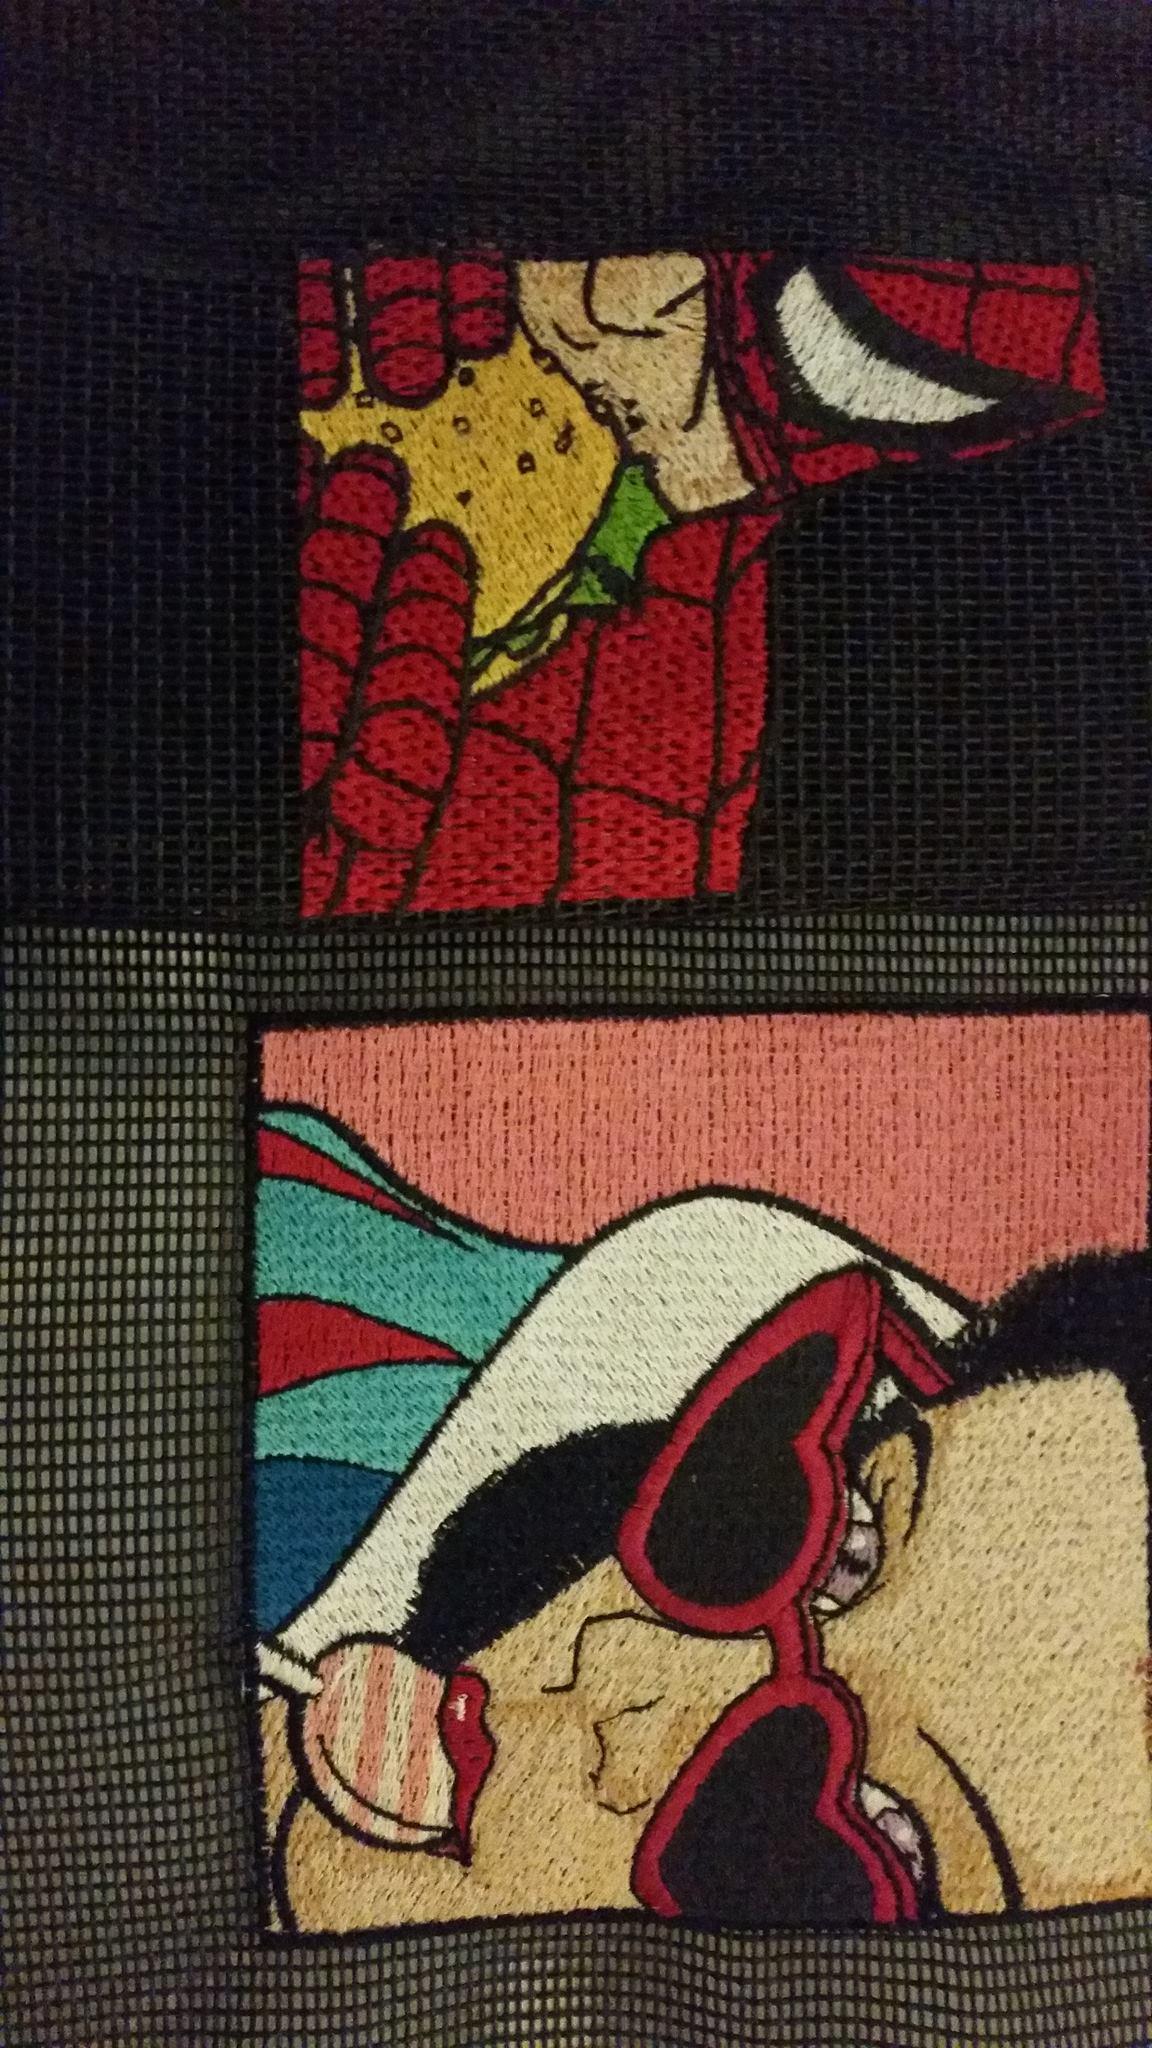 Wall carpet with Spiderman and Snow White embroidery designs